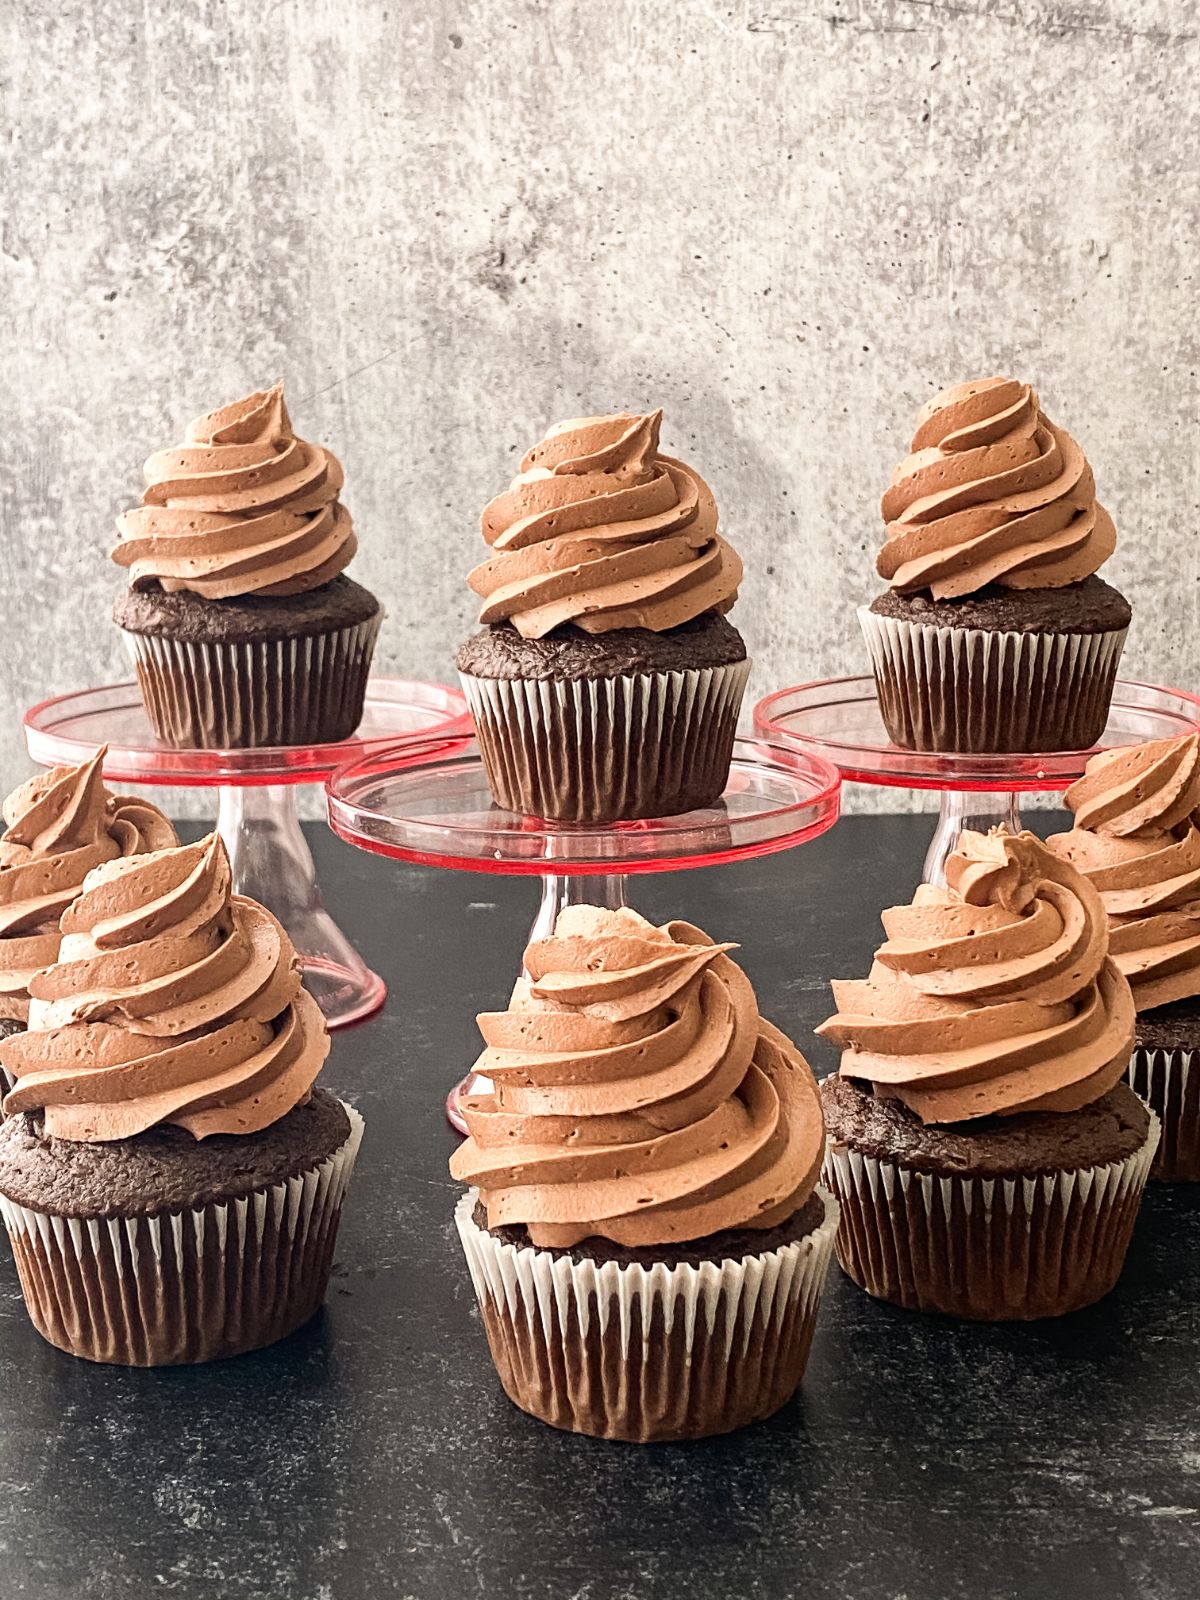 chocolate cupcakes with chocolate frosting on table